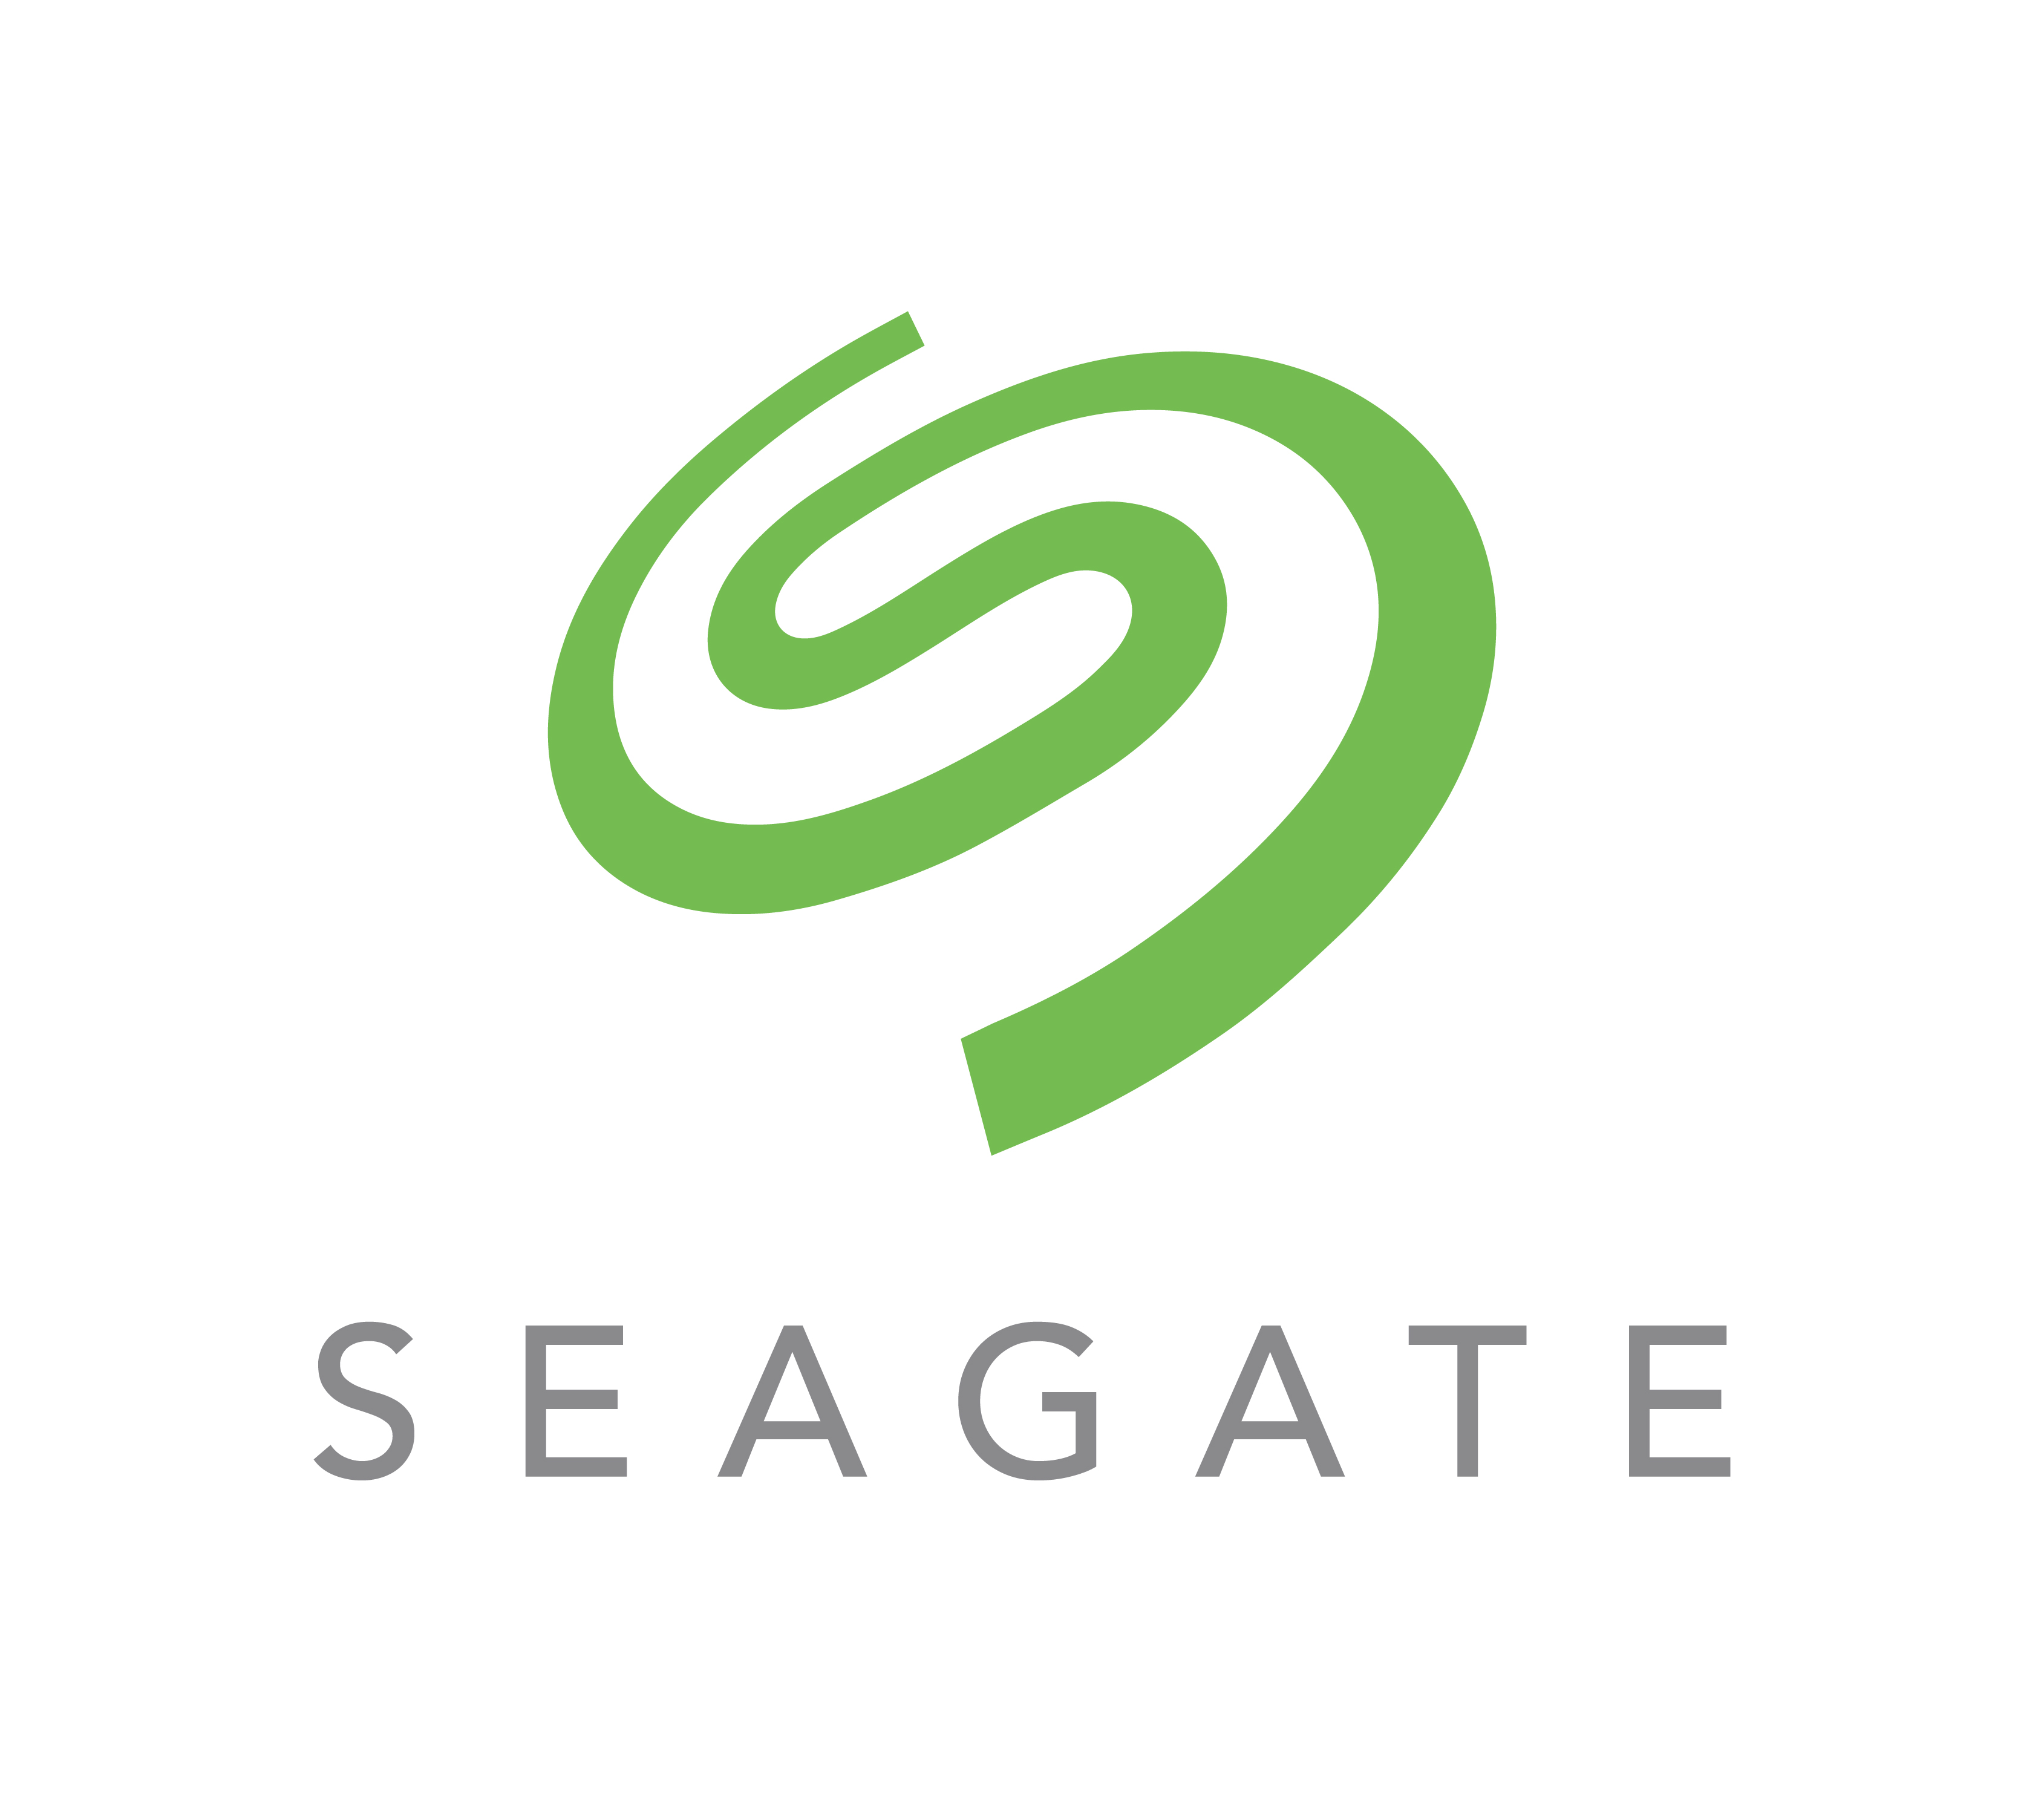 Seagate Announces Hard Drive With 2TB Capacity In a 7MM ... - 3379 x 2967 jpeg 374kB